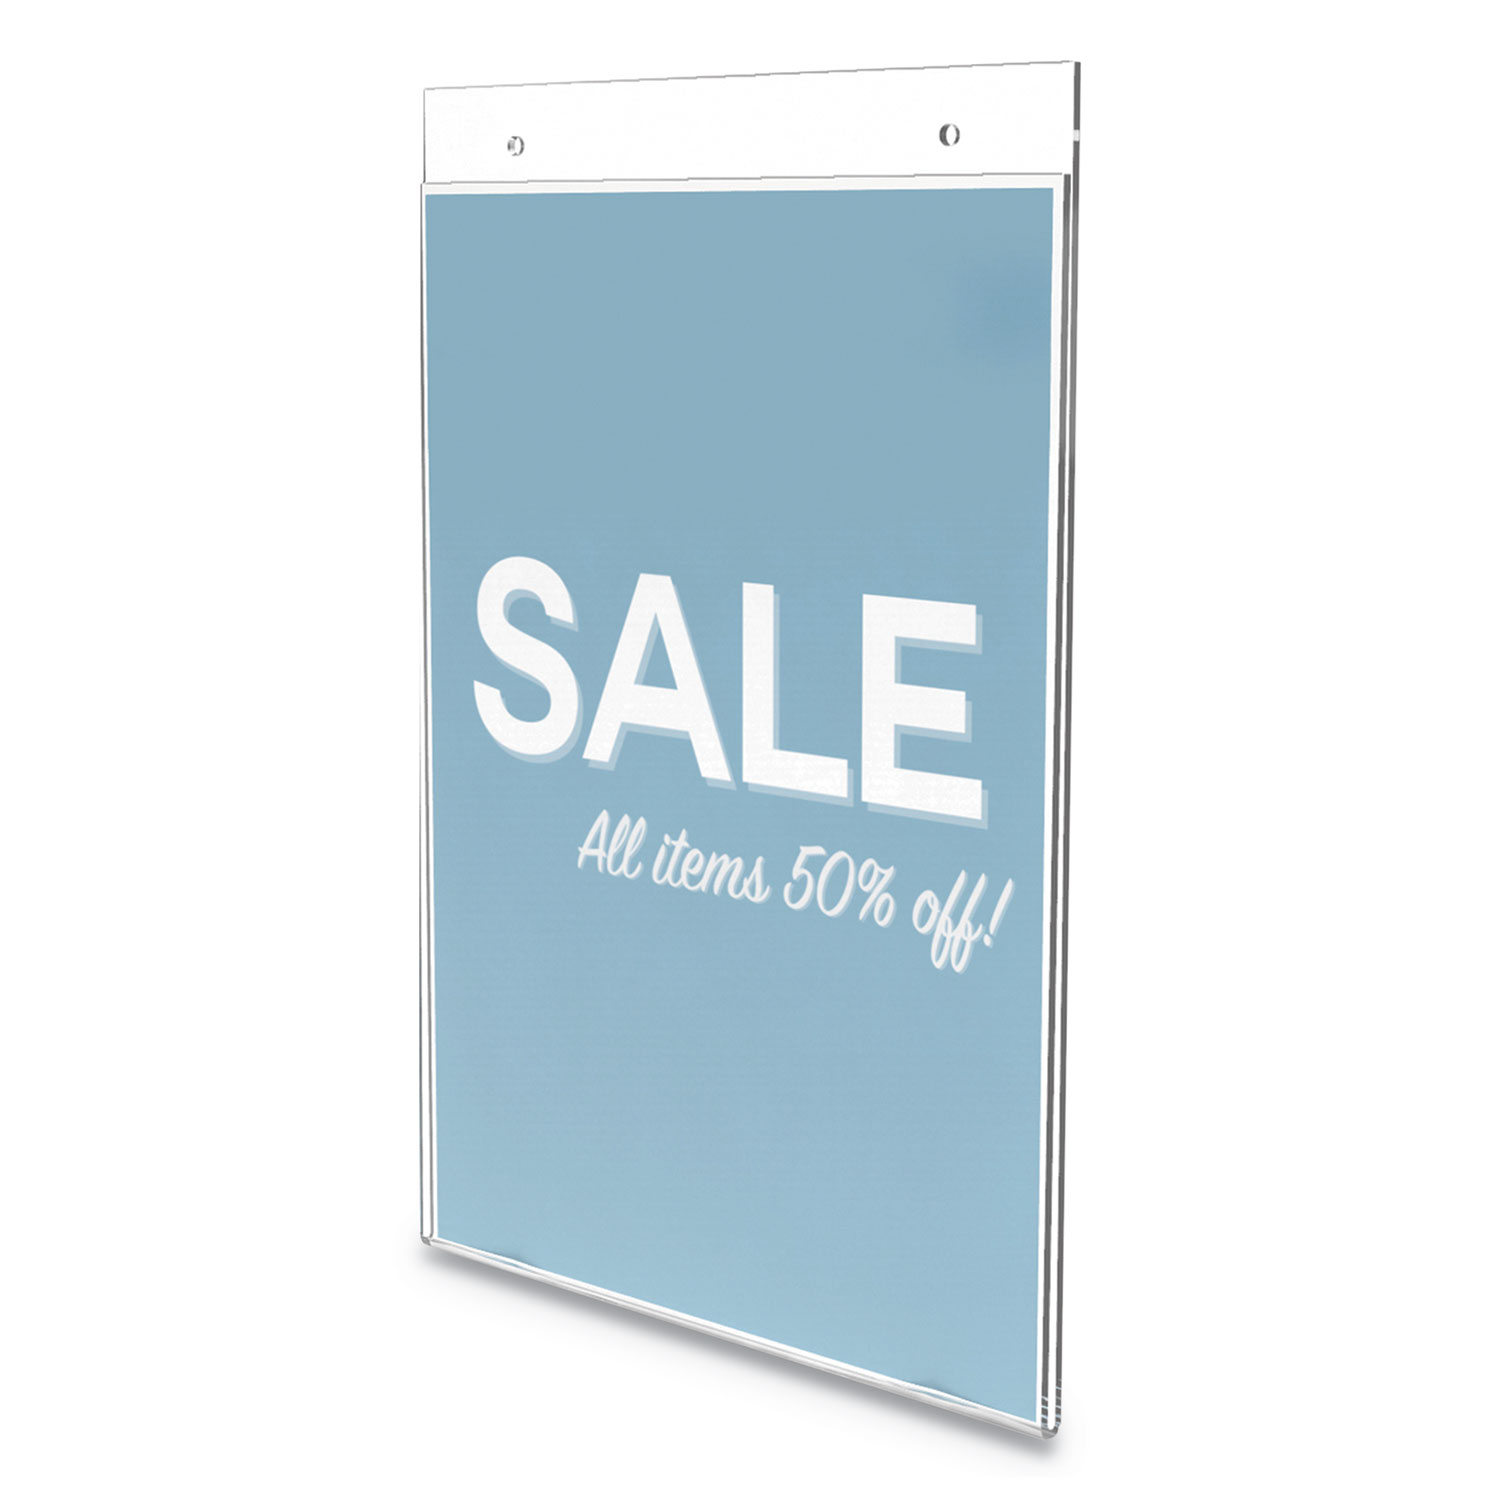 Classic Image Wall Sign Holder, 8 1/2